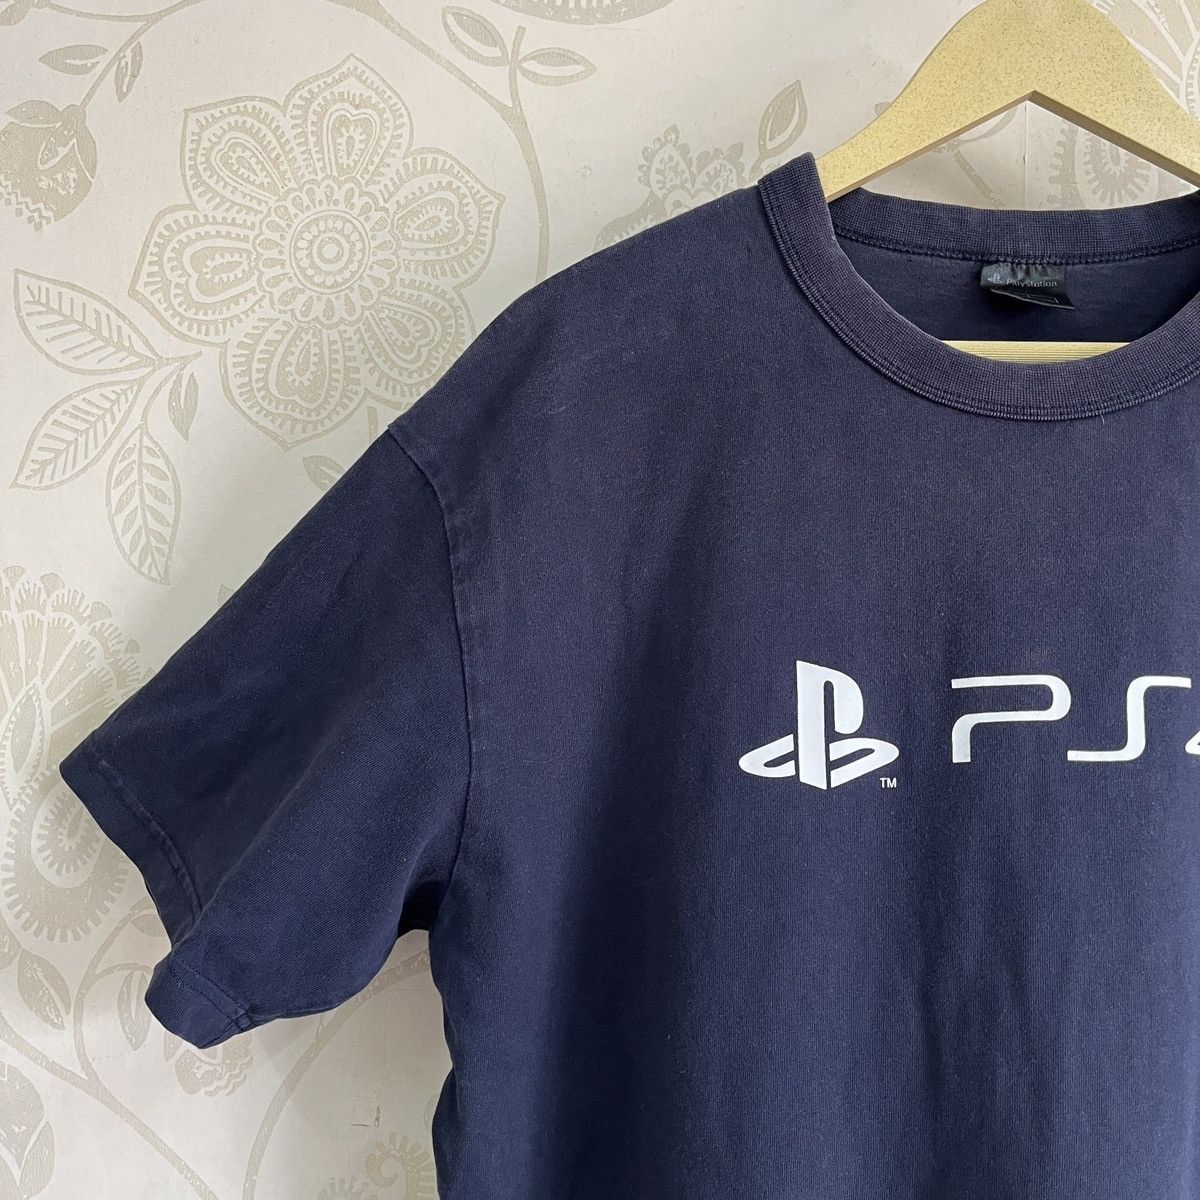 Playstation PS4 Promo TShirt Japan Official Licensed Product - 6